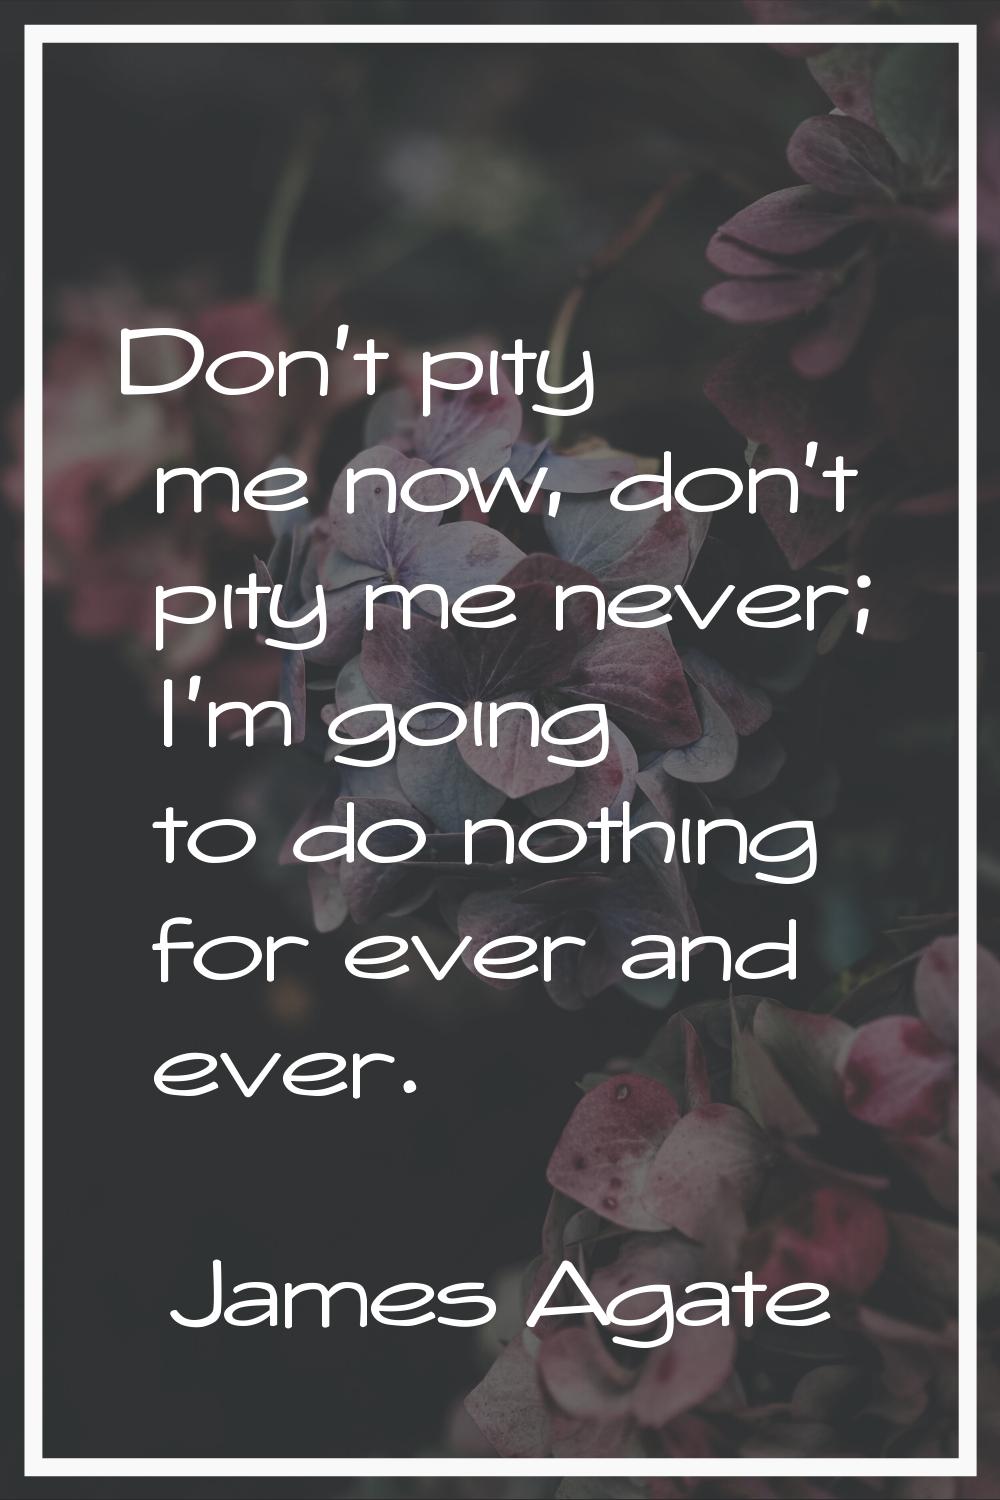 Don't pity me now, don't pity me never; I'm going to do nothing for ever and ever.